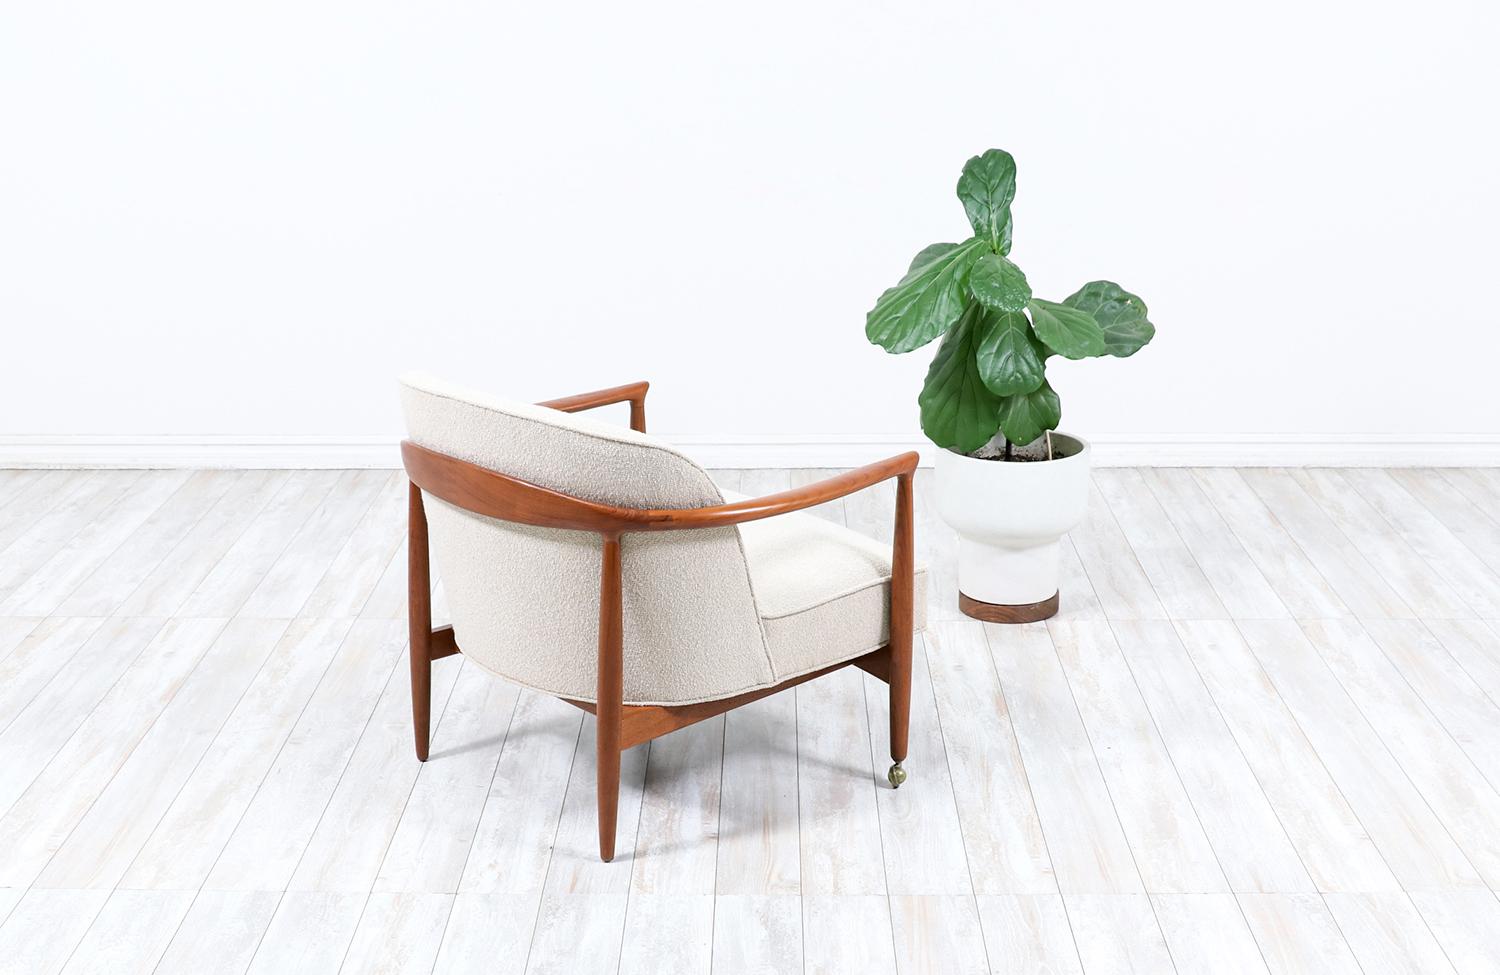  Expertly Restored - Danish Modern Teak Lounge Chair by Finn Andersen for Selig In Excellent Condition For Sale In Los Angeles, CA